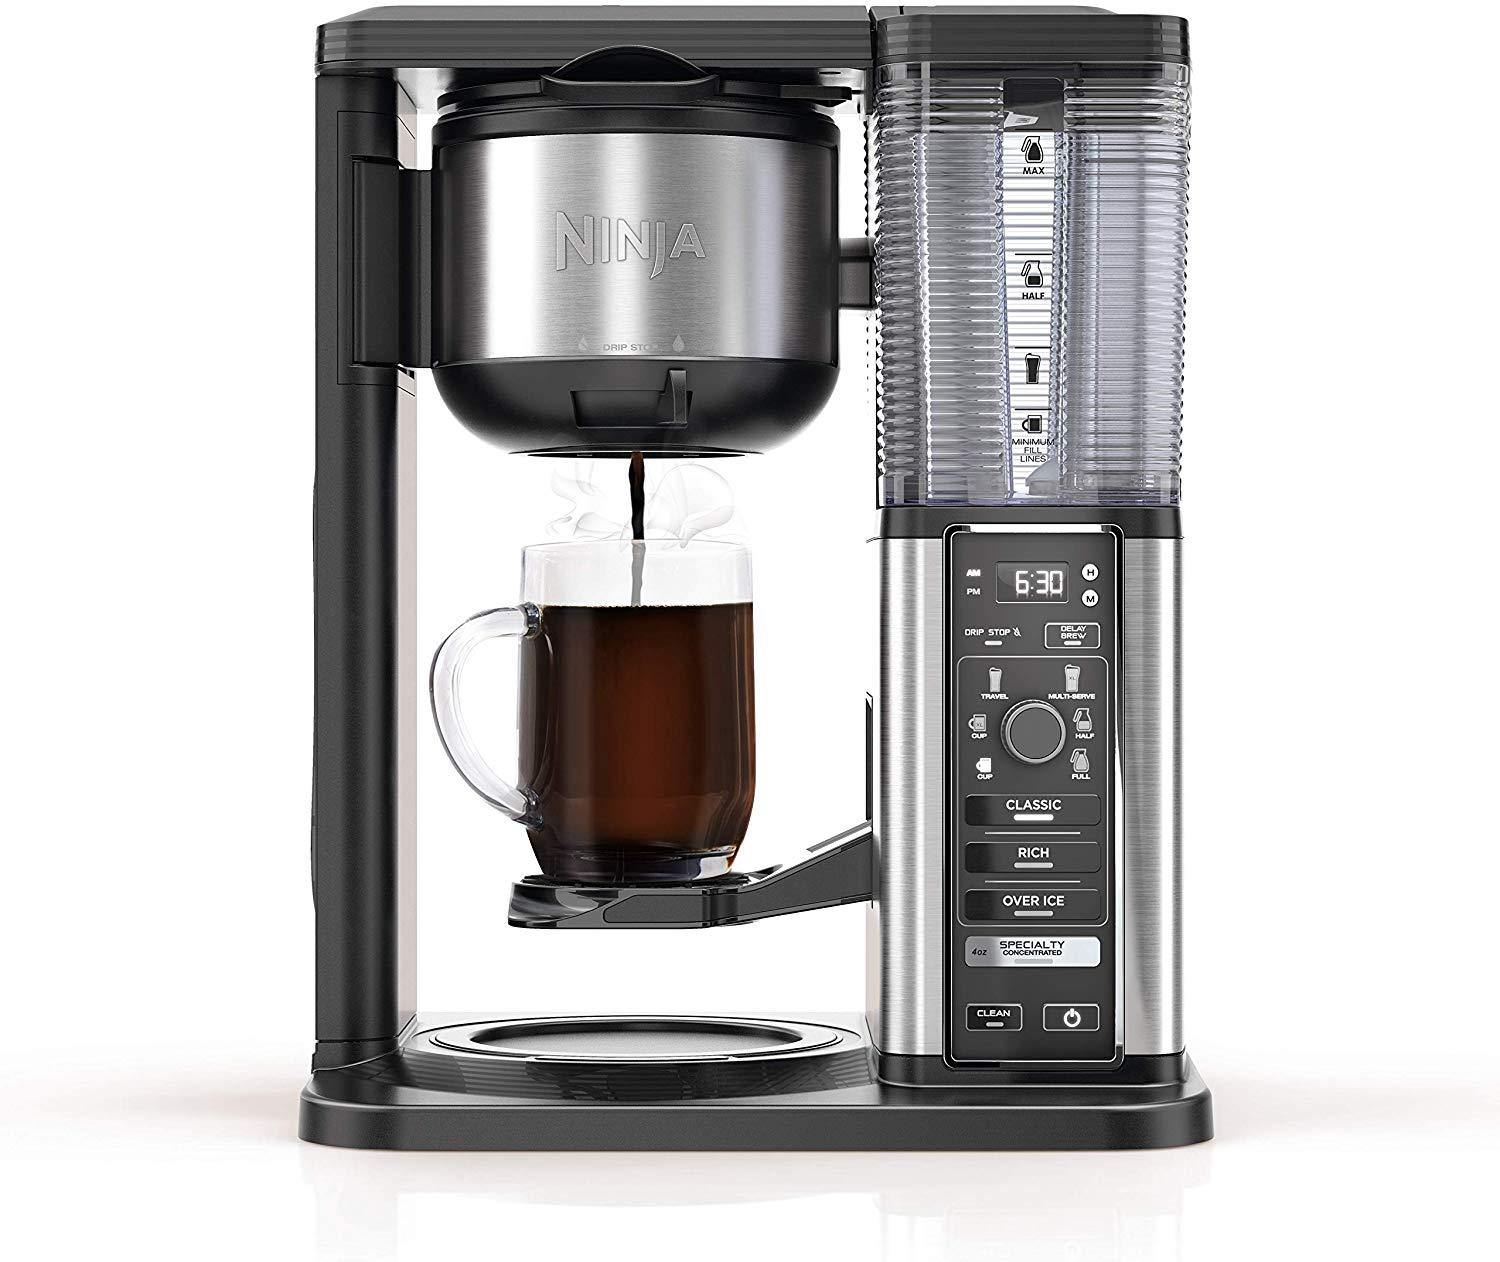 A Great Single Cup Brewing Option! Ninja Coffee Maker Review